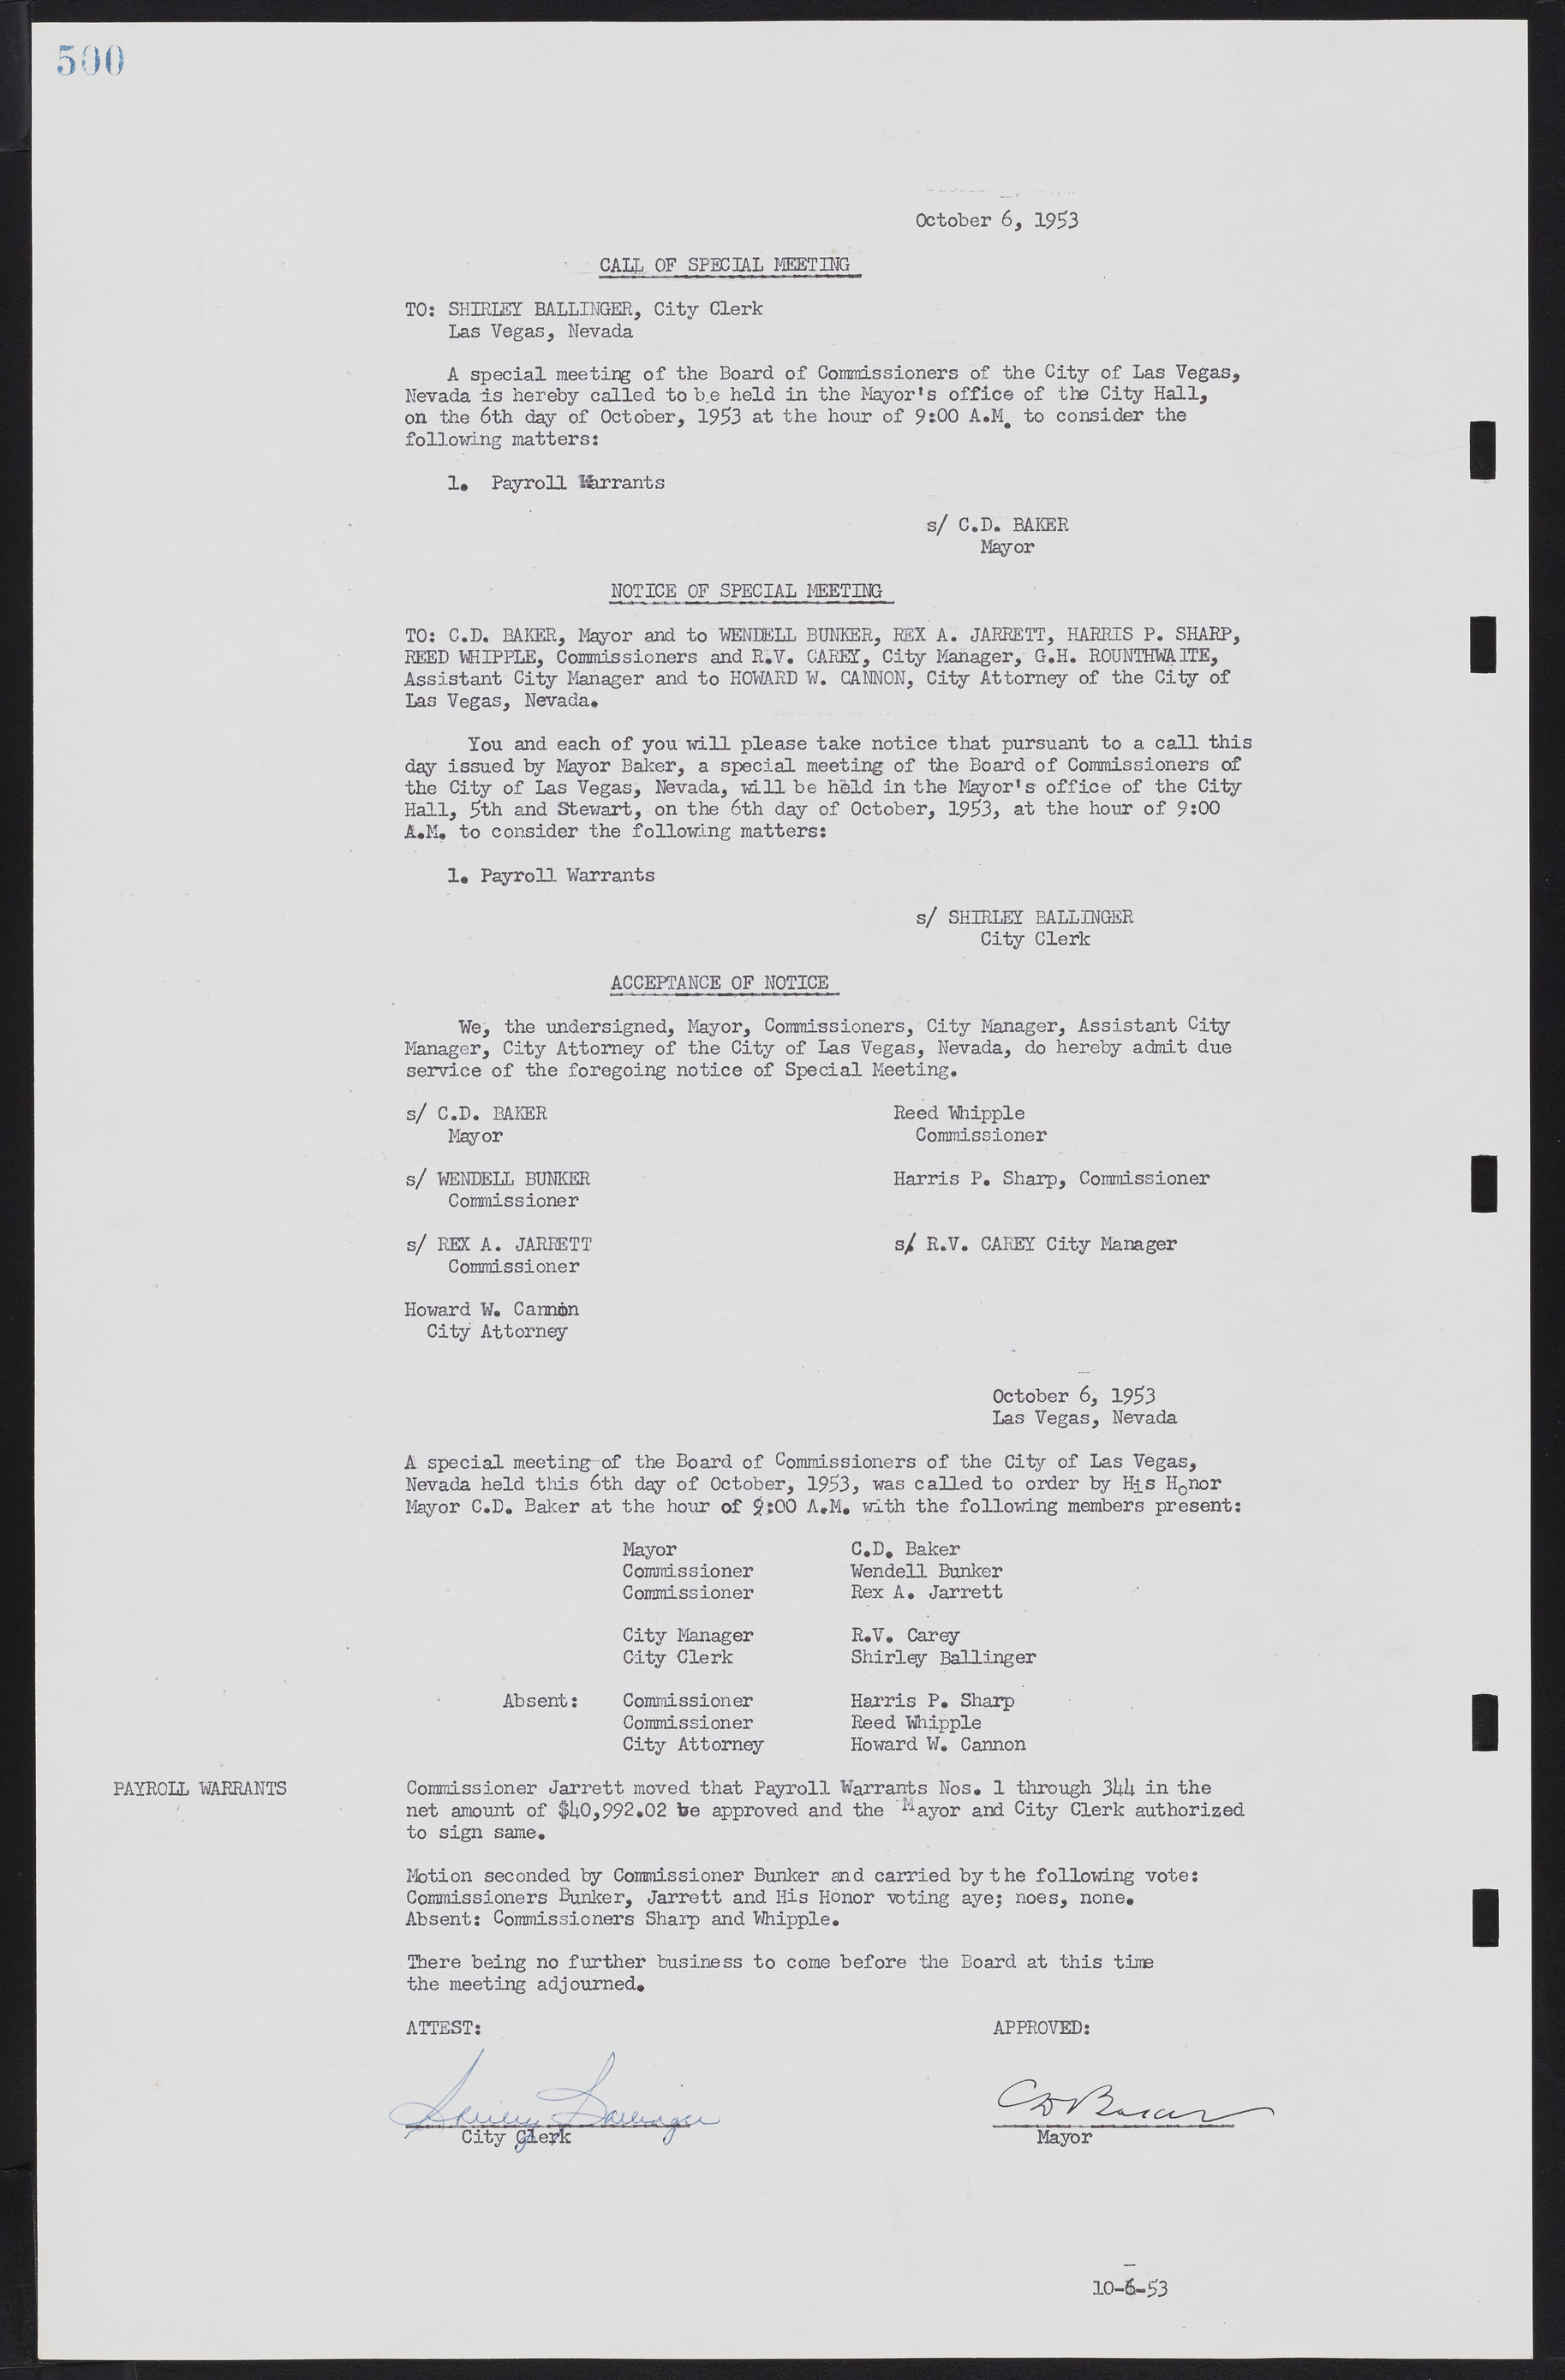 Las Vegas City Commission Minutes, May 26, 1952 to February 17, 1954, lvc000008-530